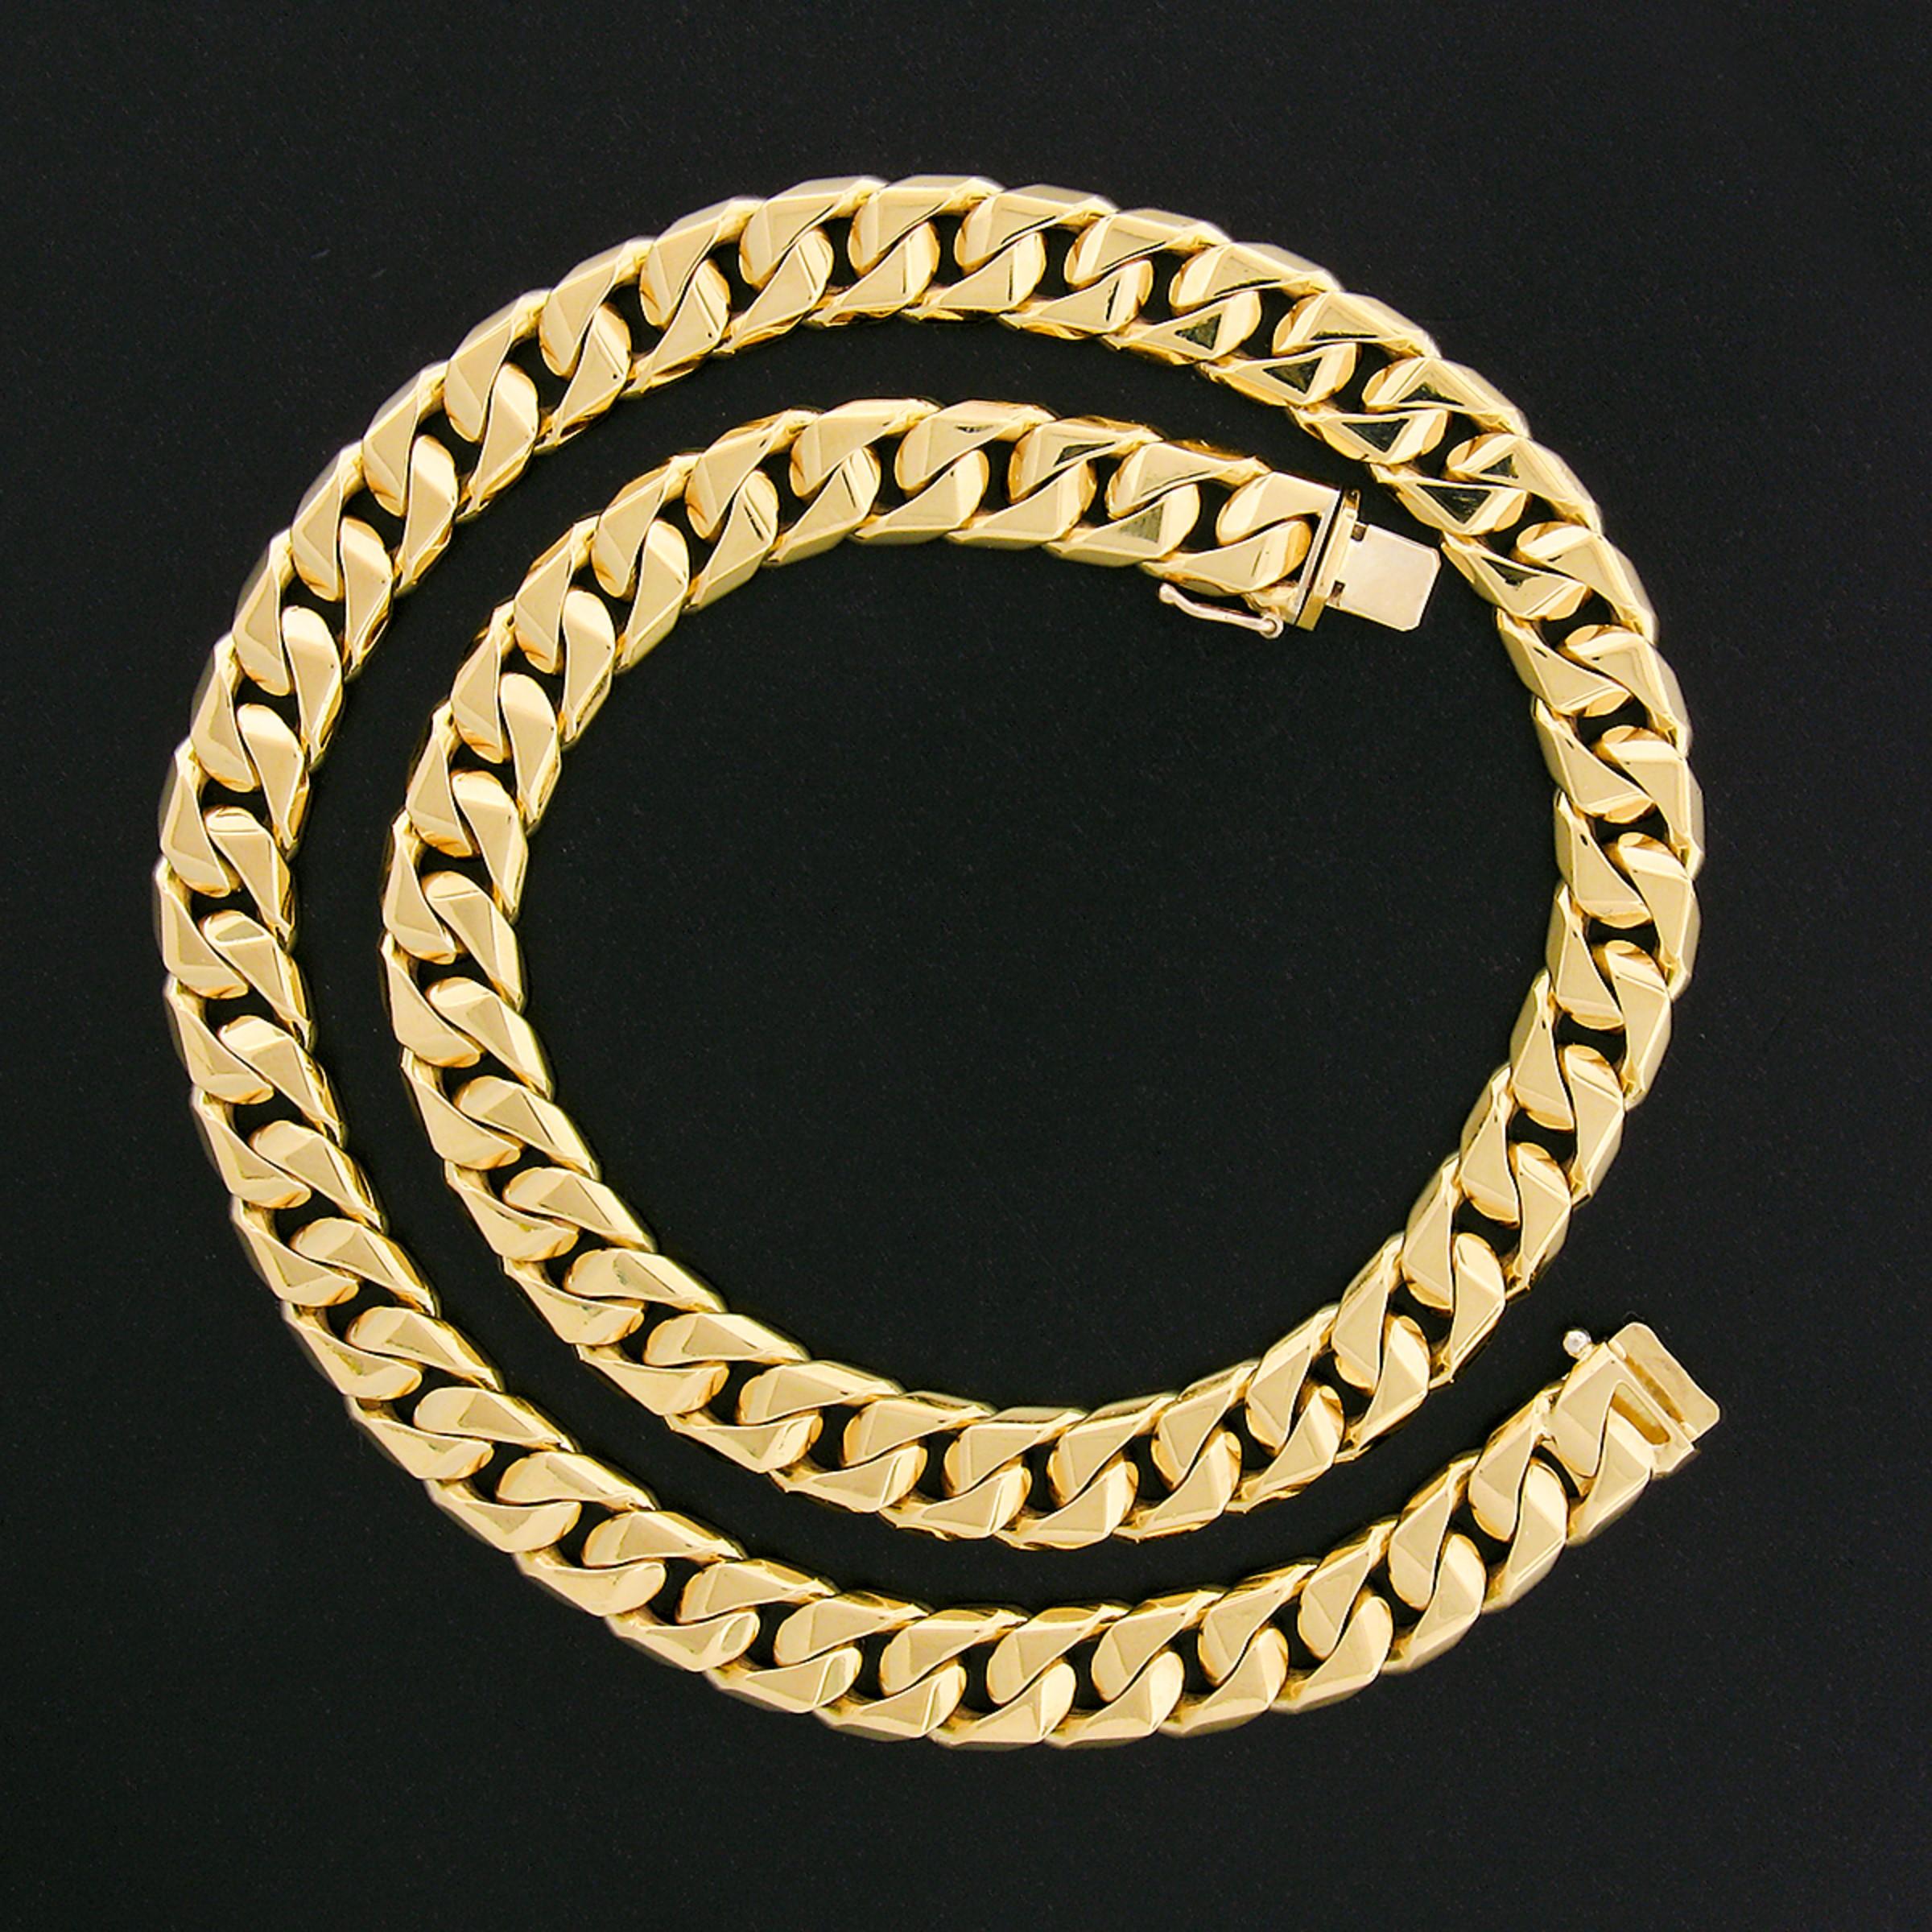 Here we have a vintage Nicolis Cola chain necklace that was well made from solid 18k yellow gold. This very solid Cuban/curb link chain is 9.1mm wide and measures 17.25 inches in length, laying close to the neck and making an absolutely elegant